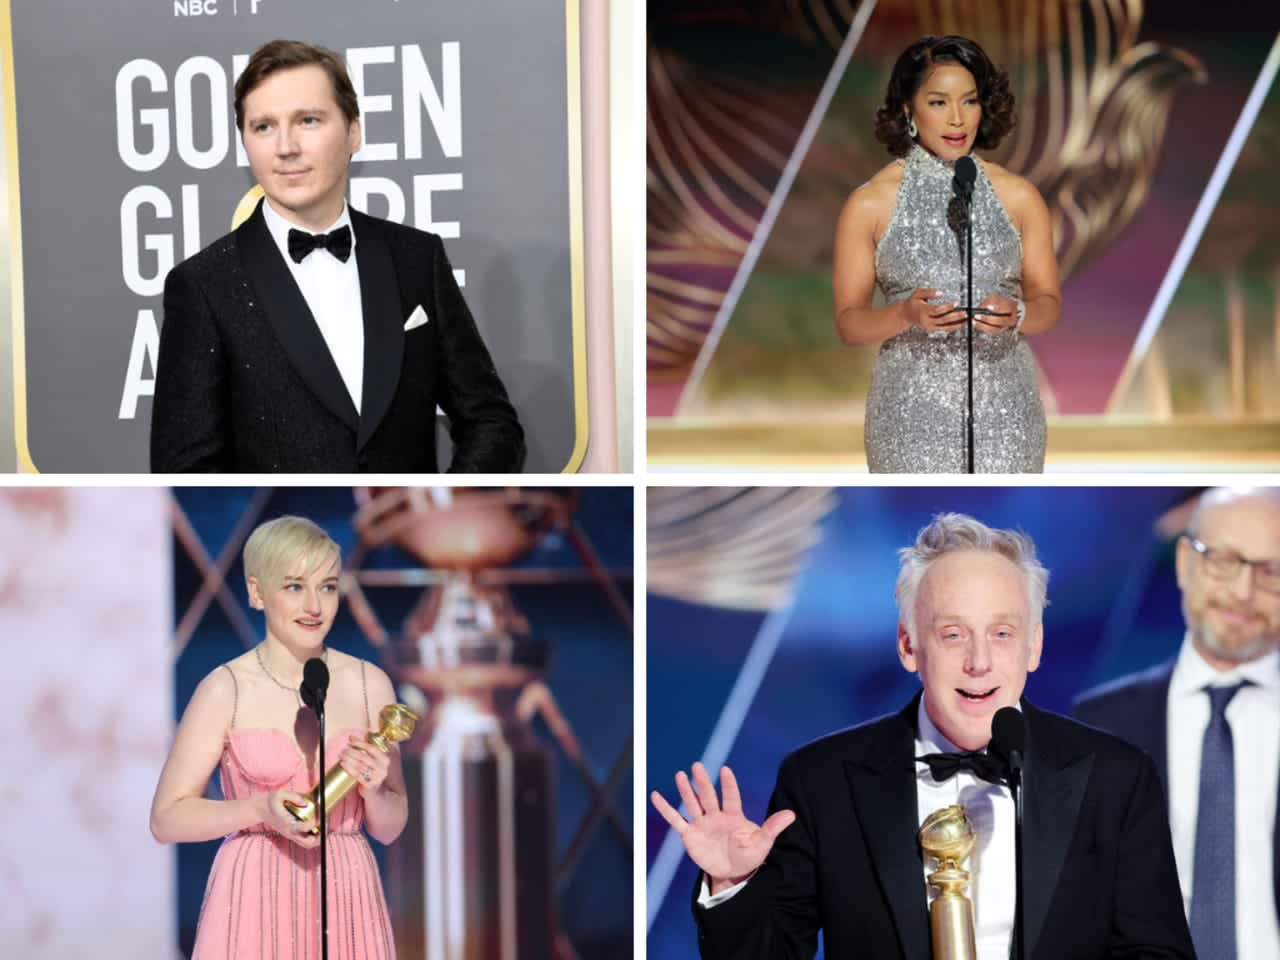 Golden Globes winners Paul Dano (top left), Angela Bassett (top right), Julia Garner (bottom left), and Mike White (bottom right) all have ties to Connecticut.